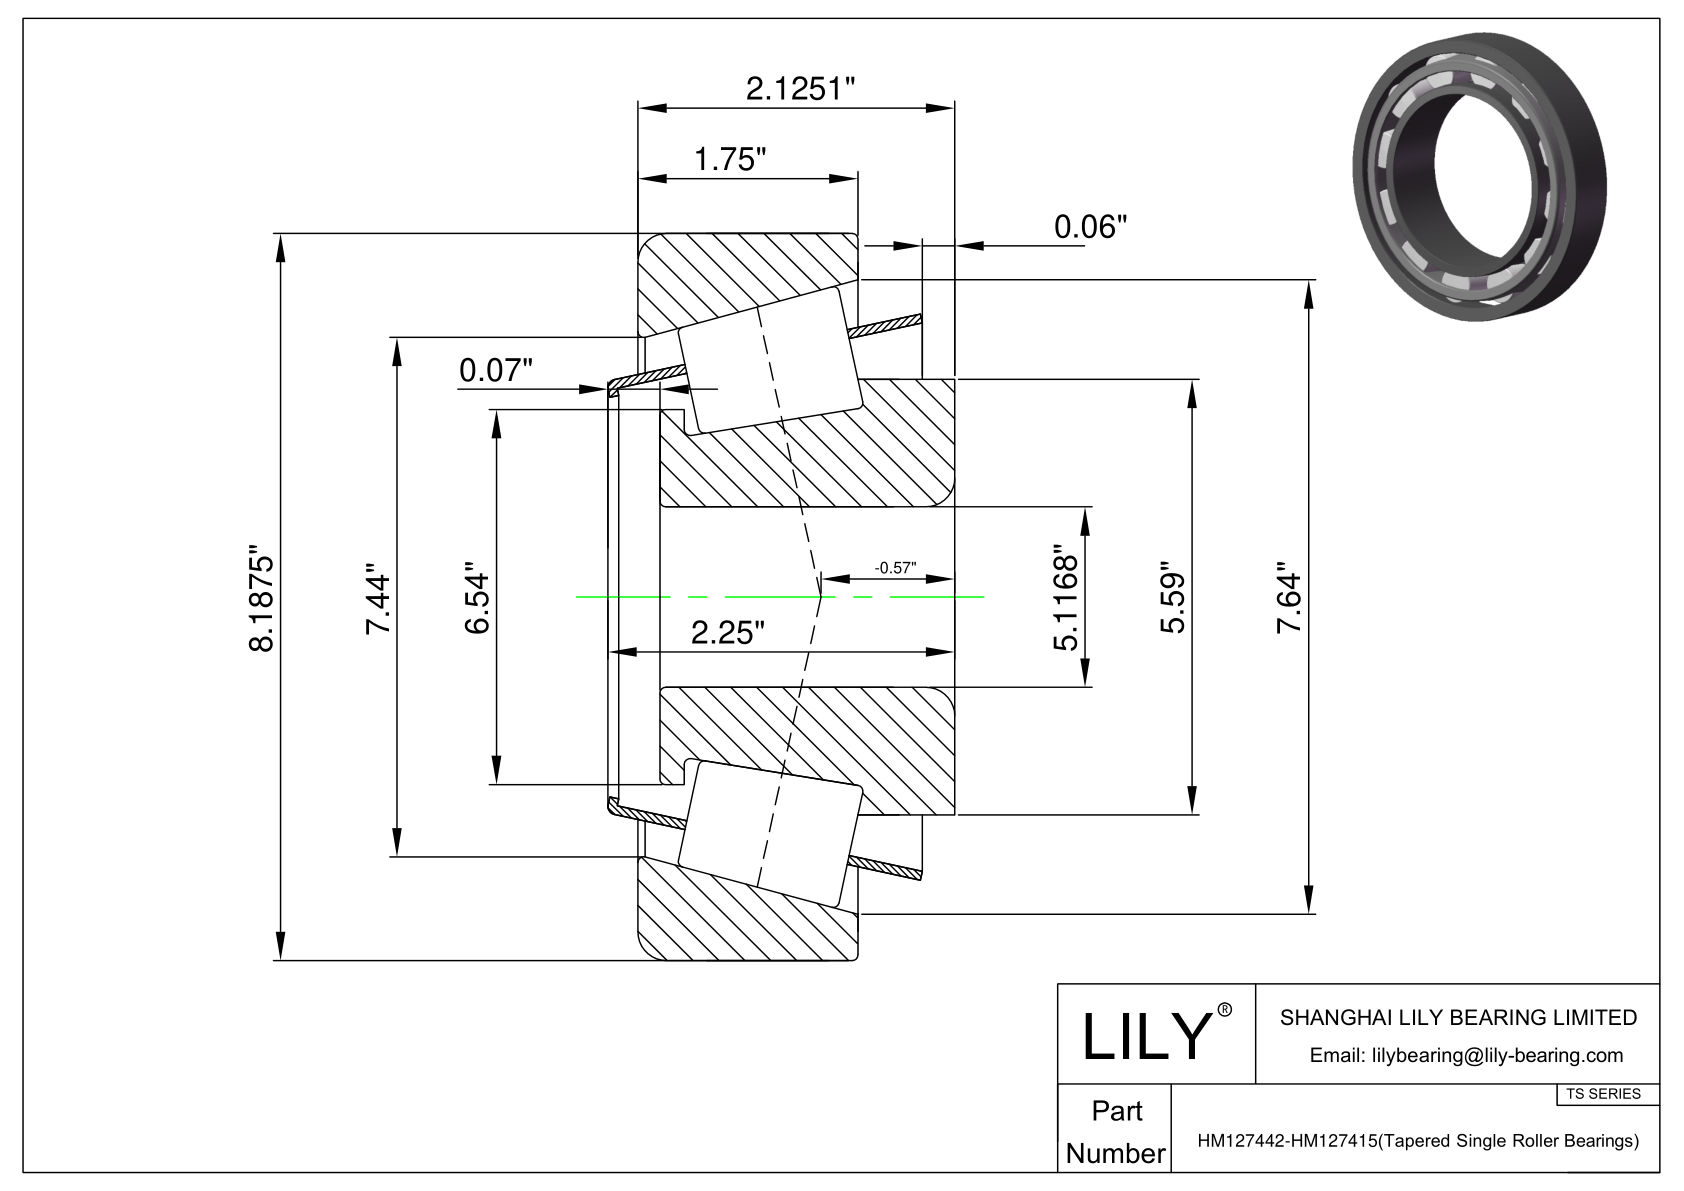 HM127442-HM127415 TS (Tapered Single Roller Bearings) (Imperial) cad drawing